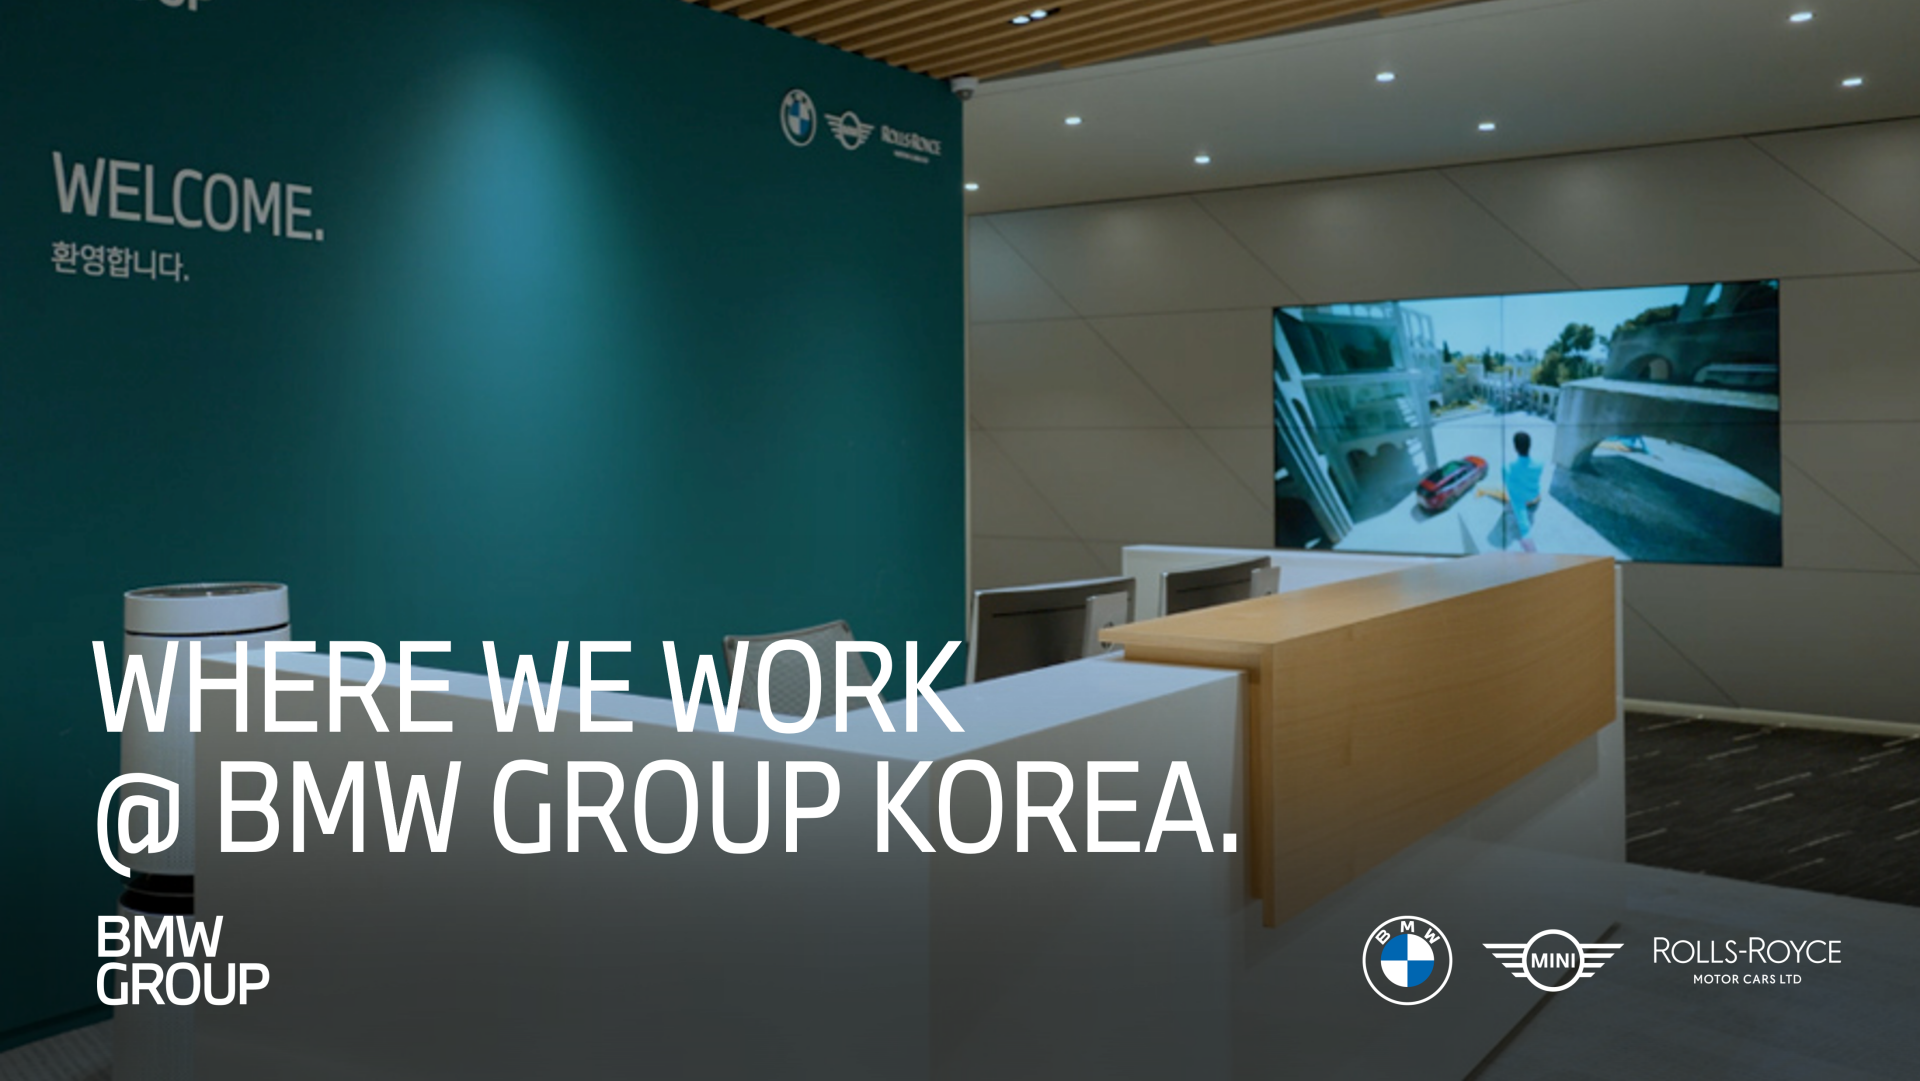 This video shows the BMW Group Korea Offices in Seoul. 